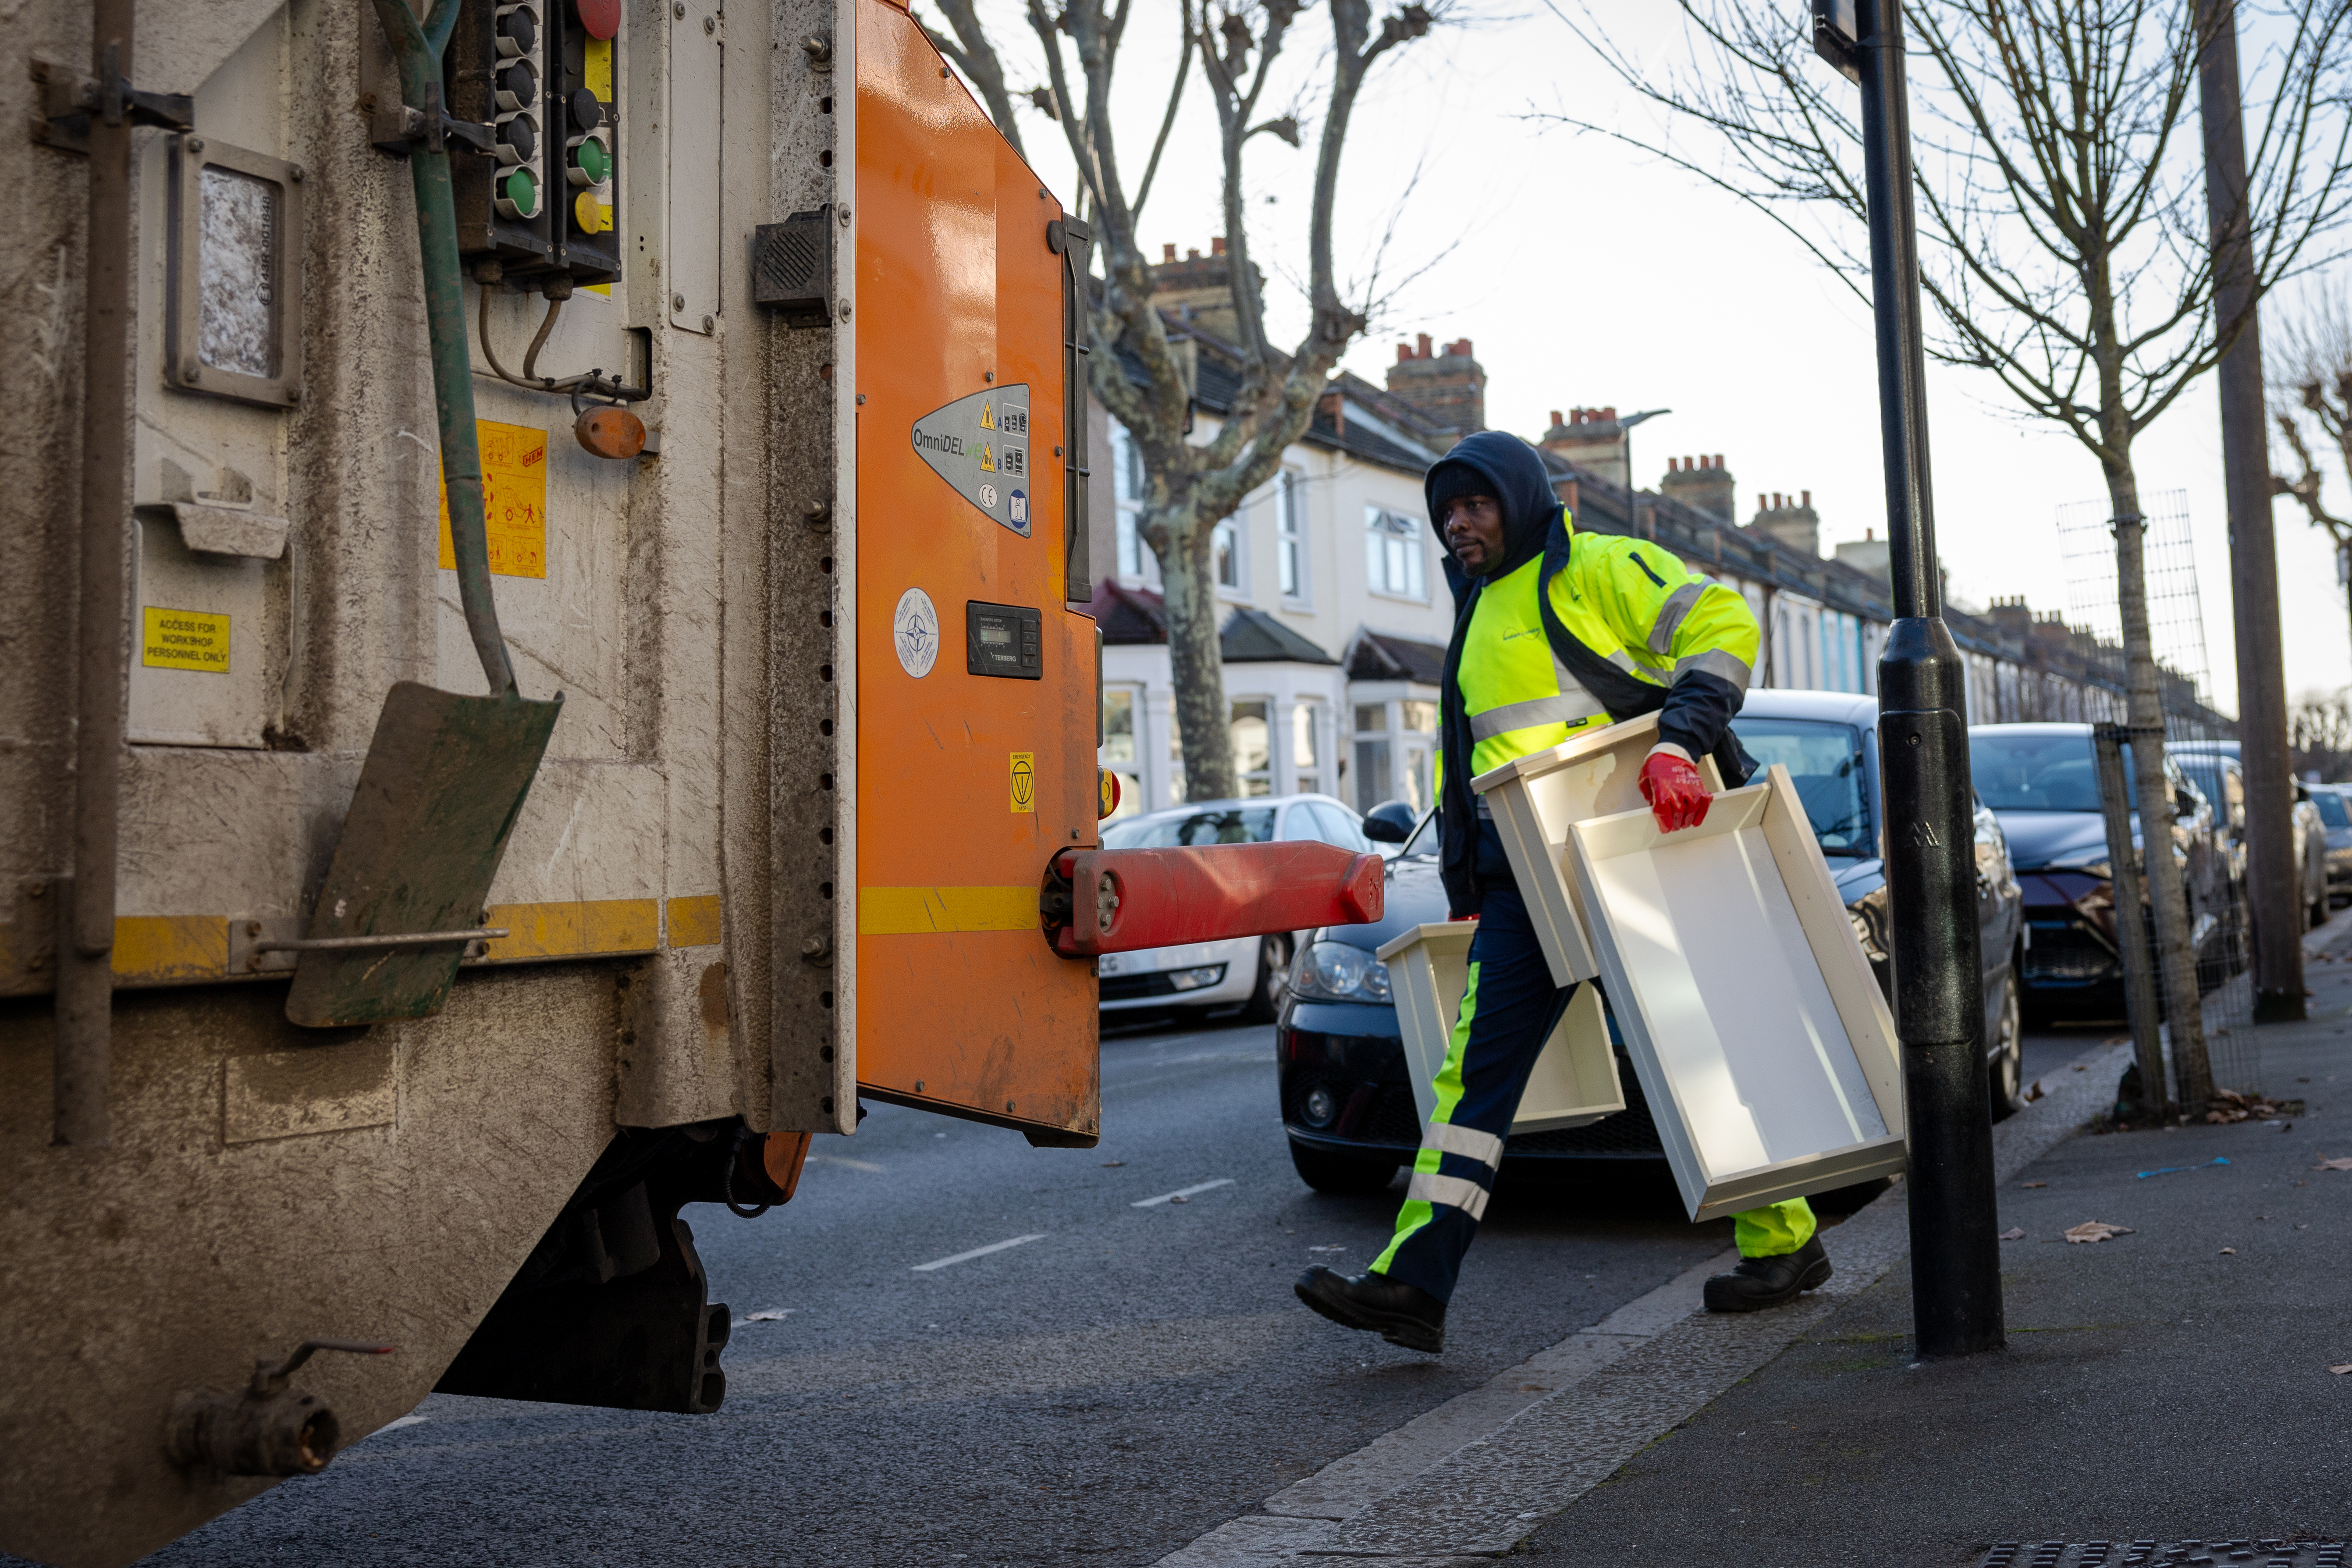 Newham Council unveils ambitious Recycling, Waste, and Street Cleansing Strategy